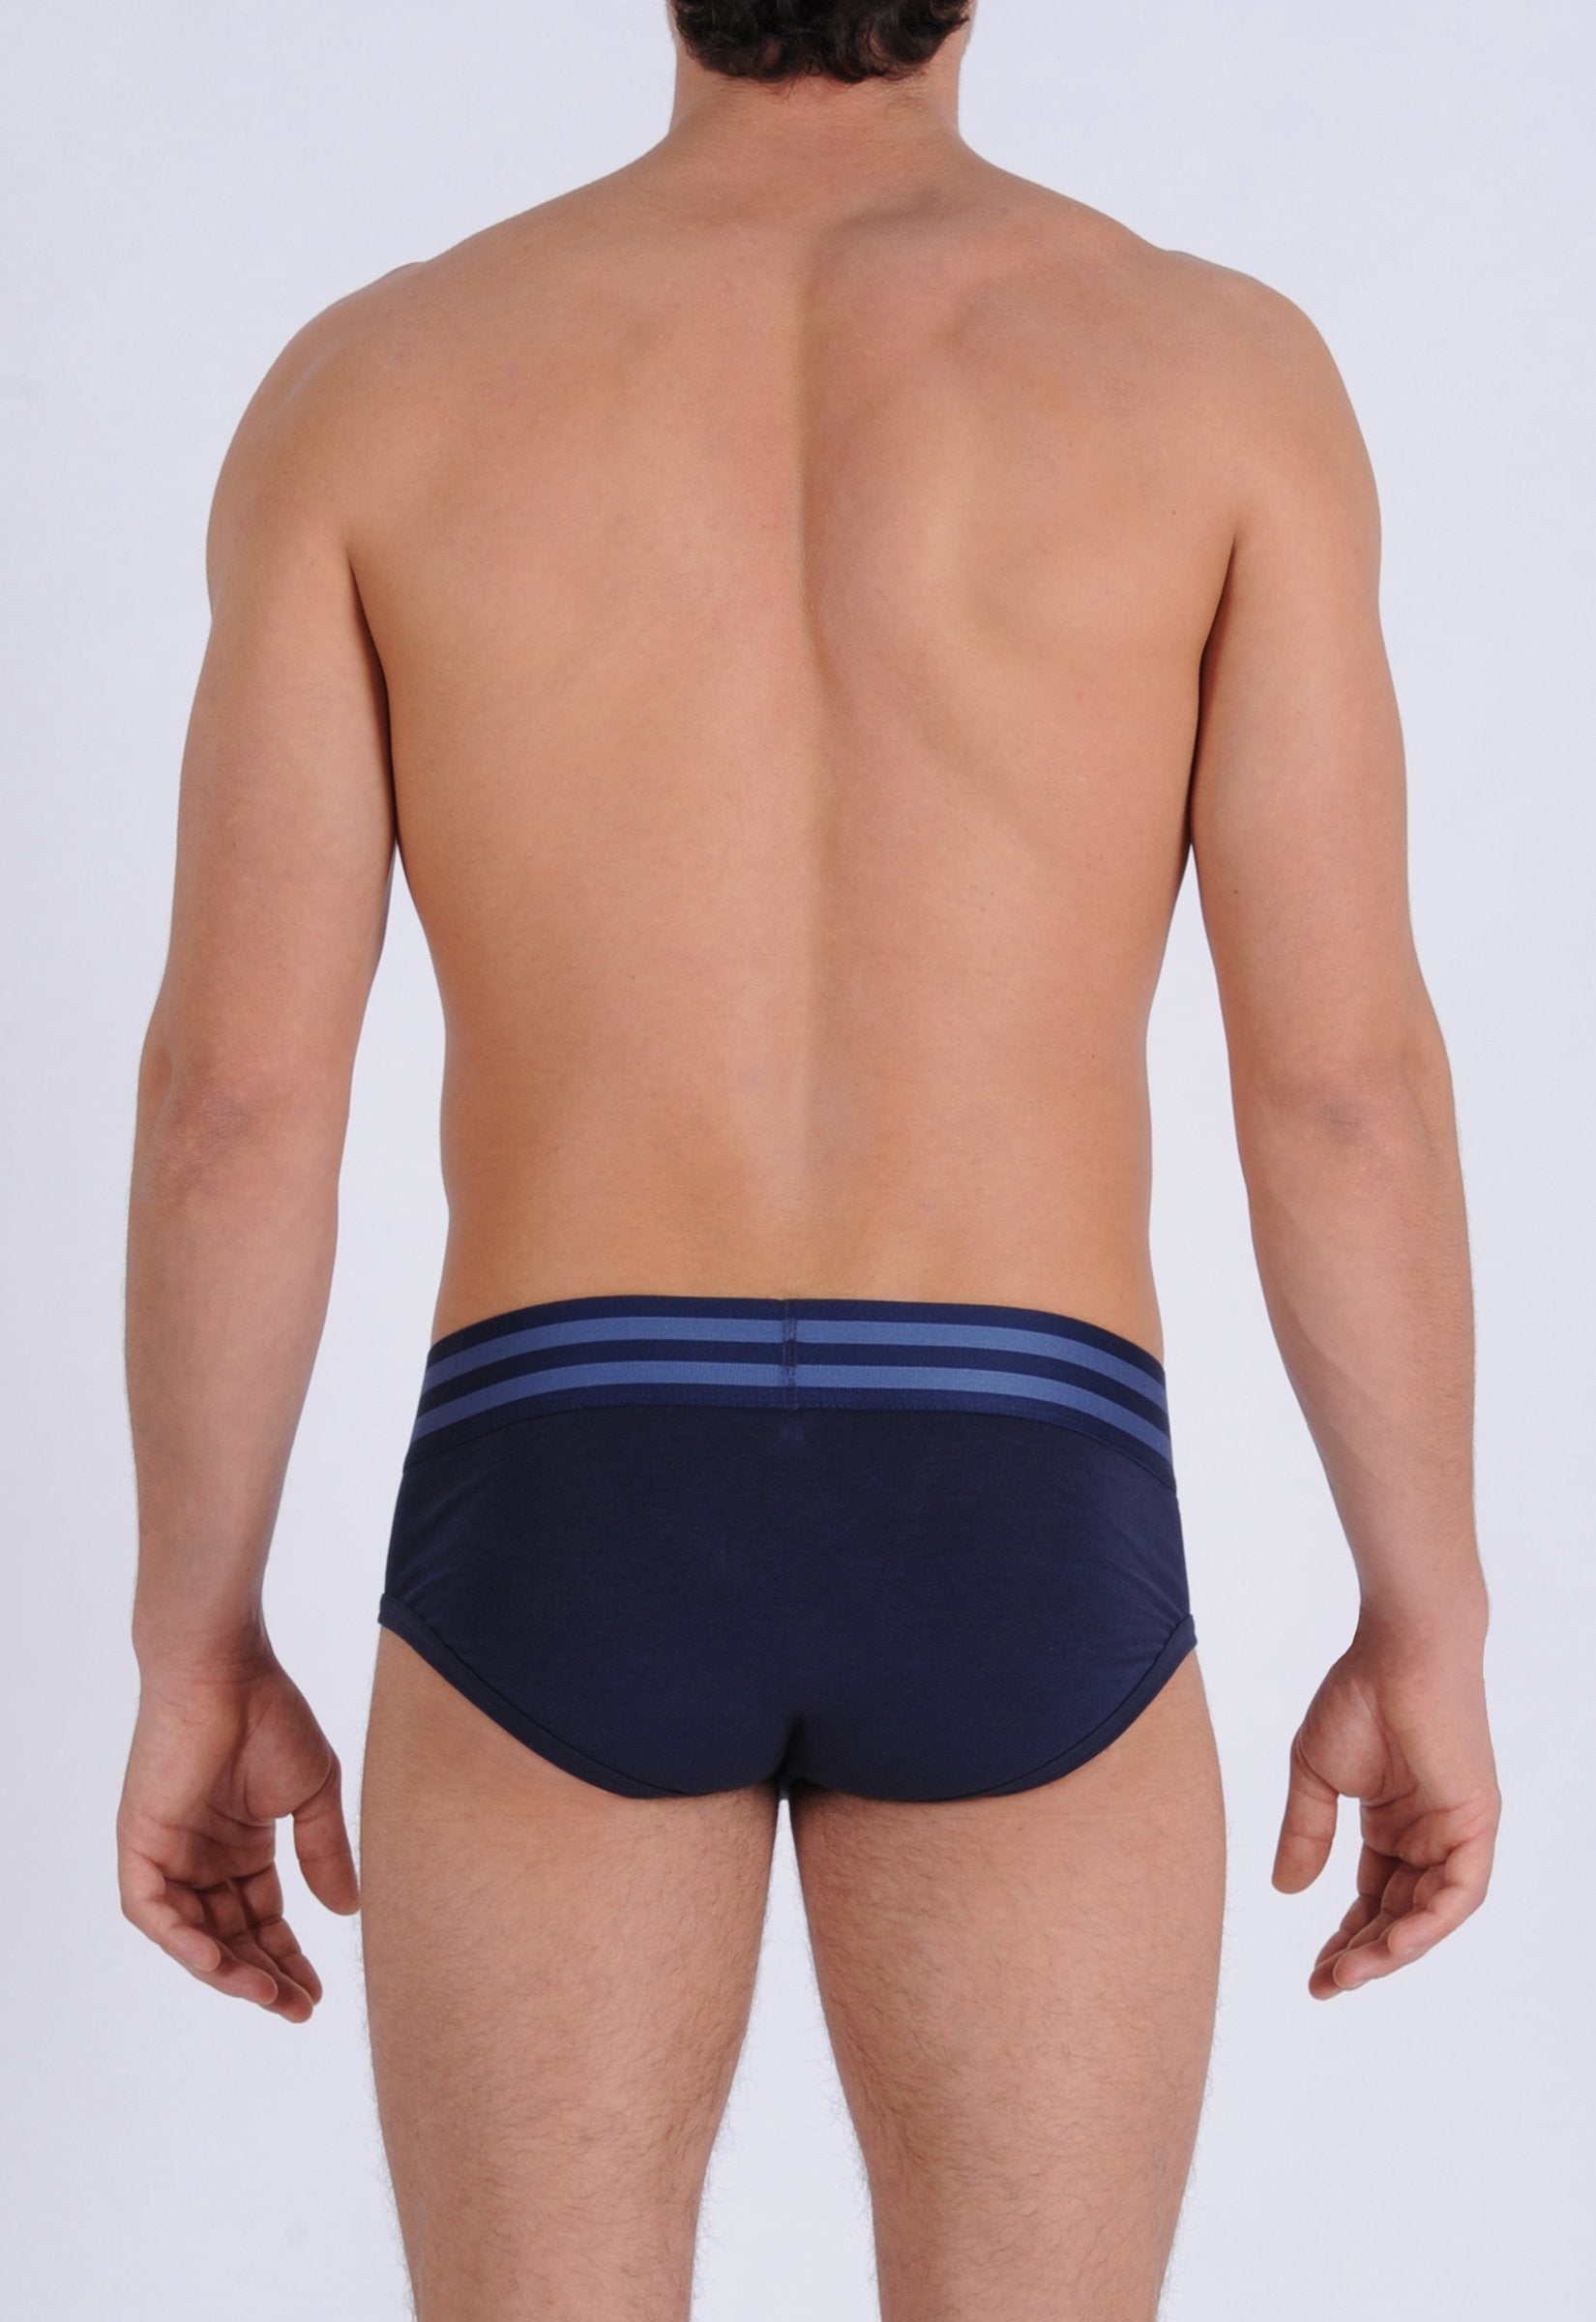 Ginch Gonch Men's Signature Series Underwear - Low Rise Brief navy printed thick waistband back